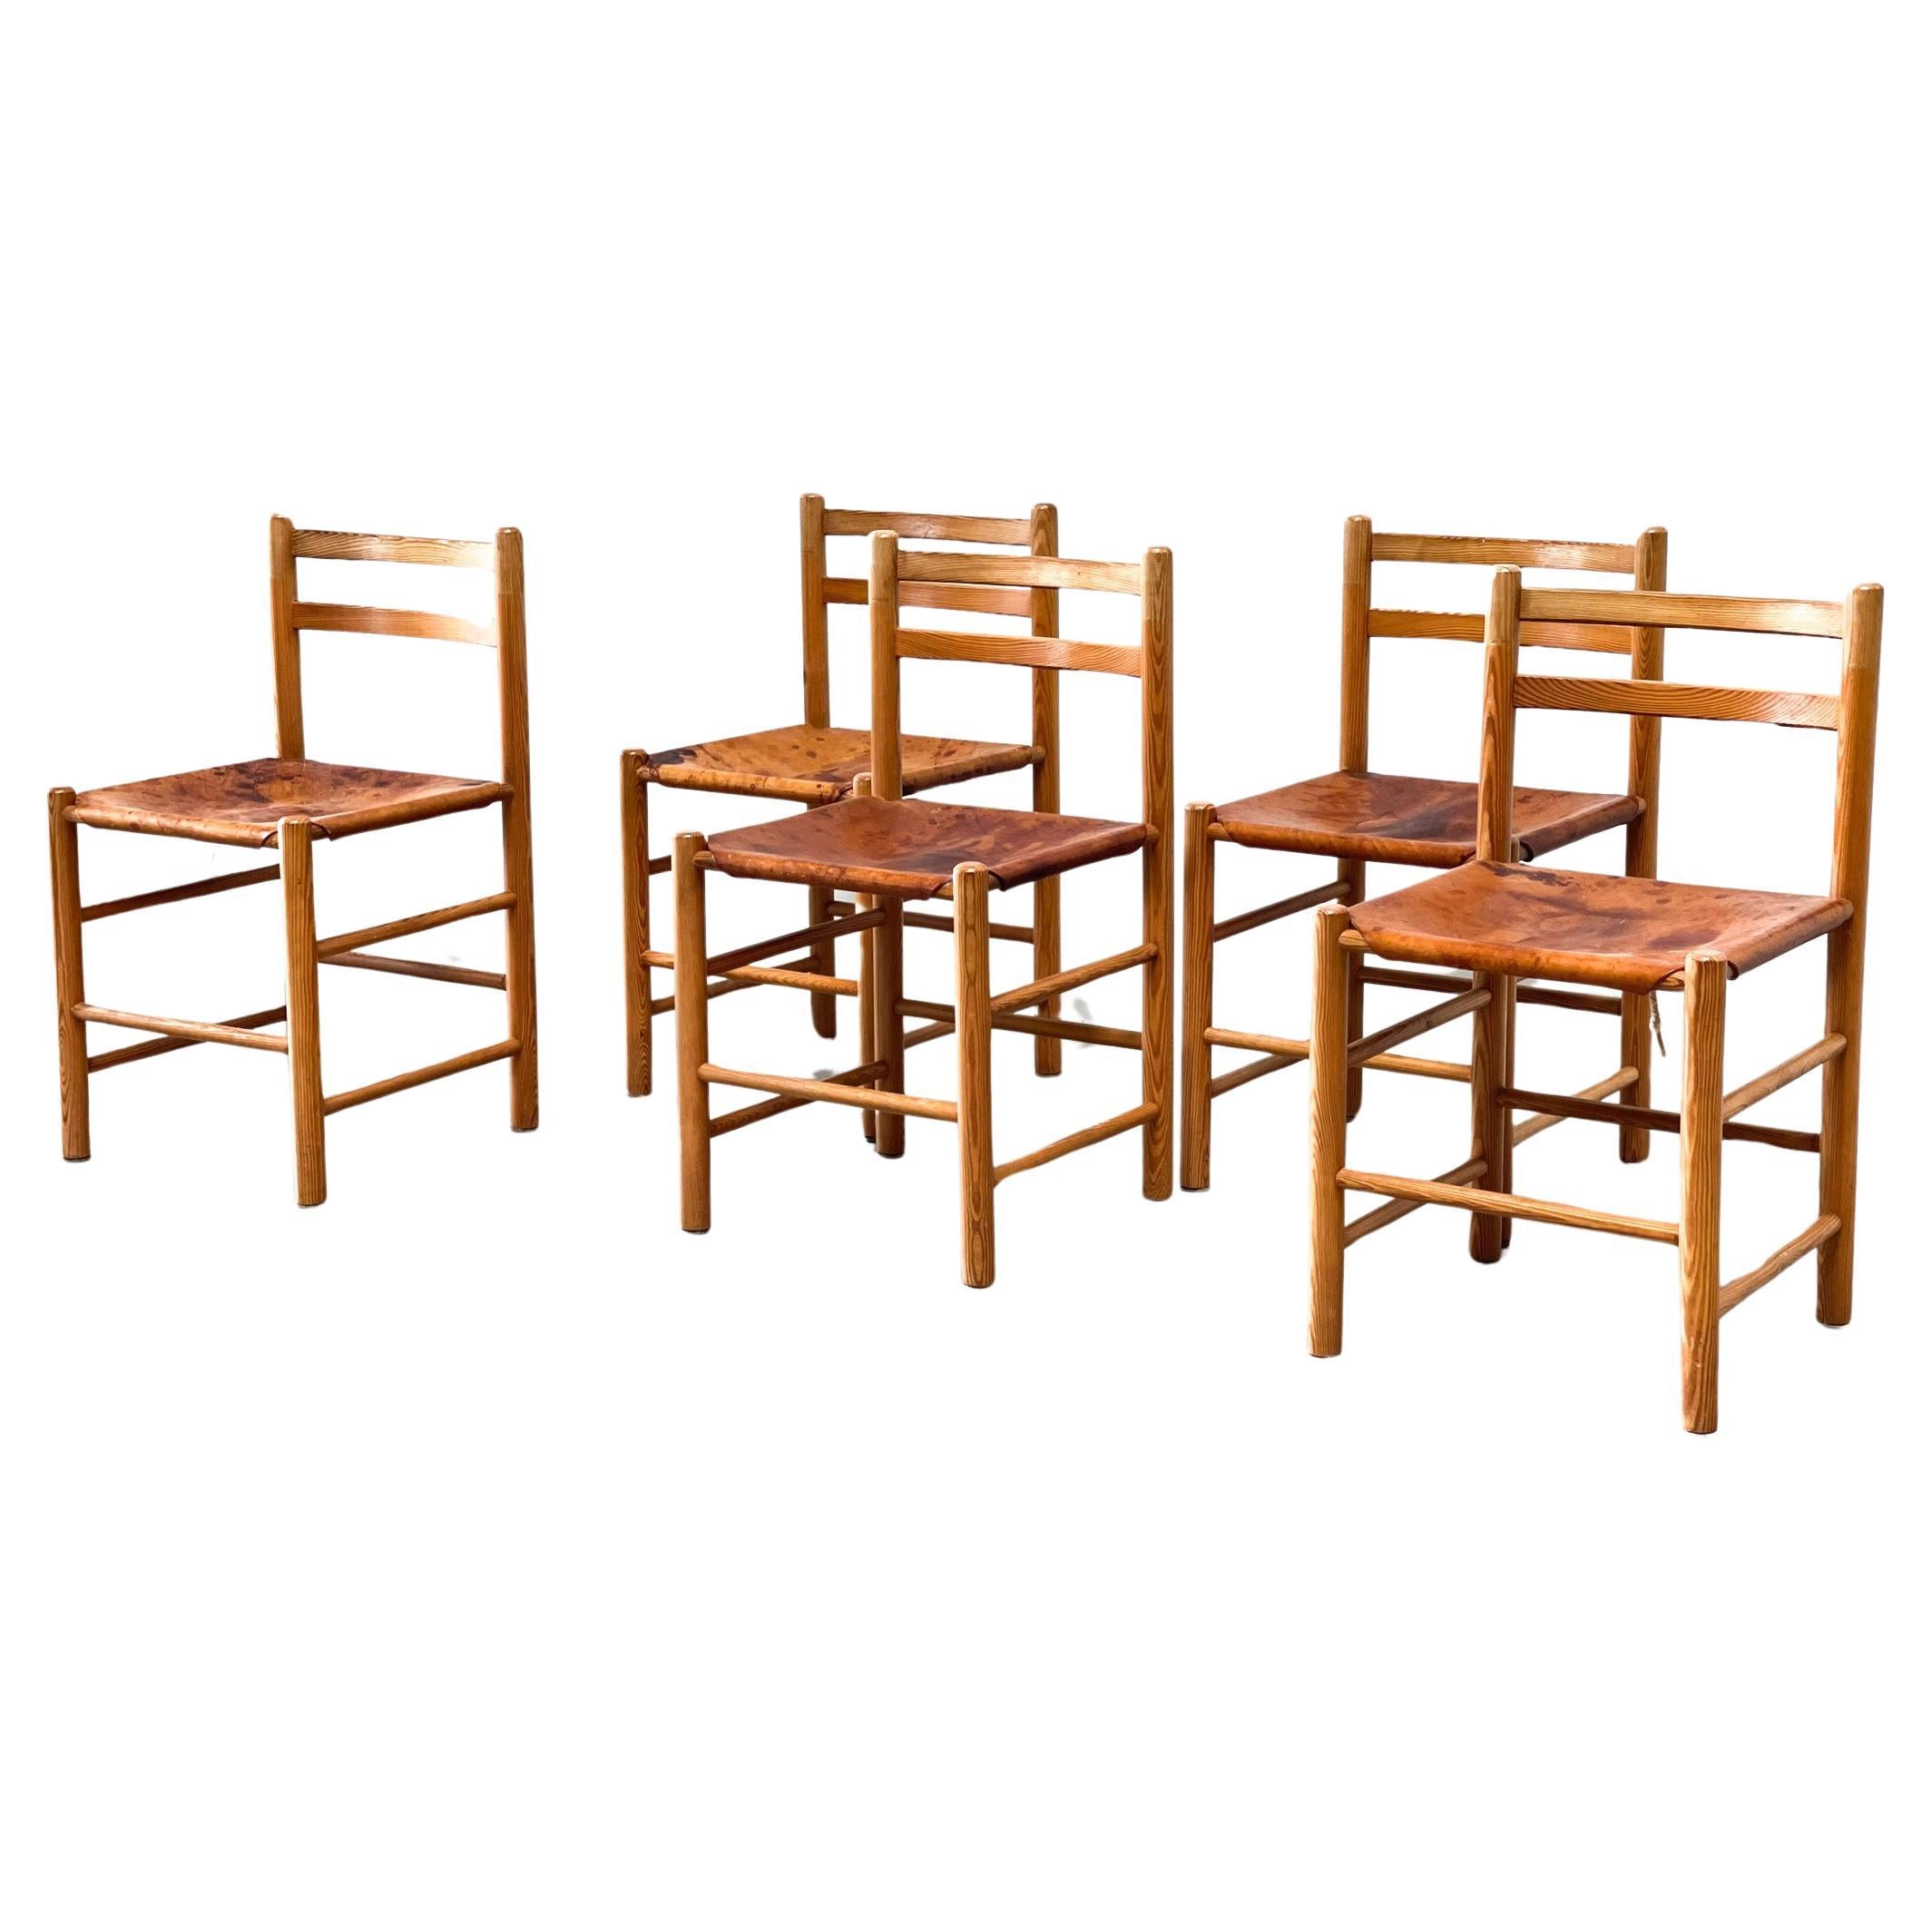 Five Ate van Apeldoorn patinated leather dining chairs